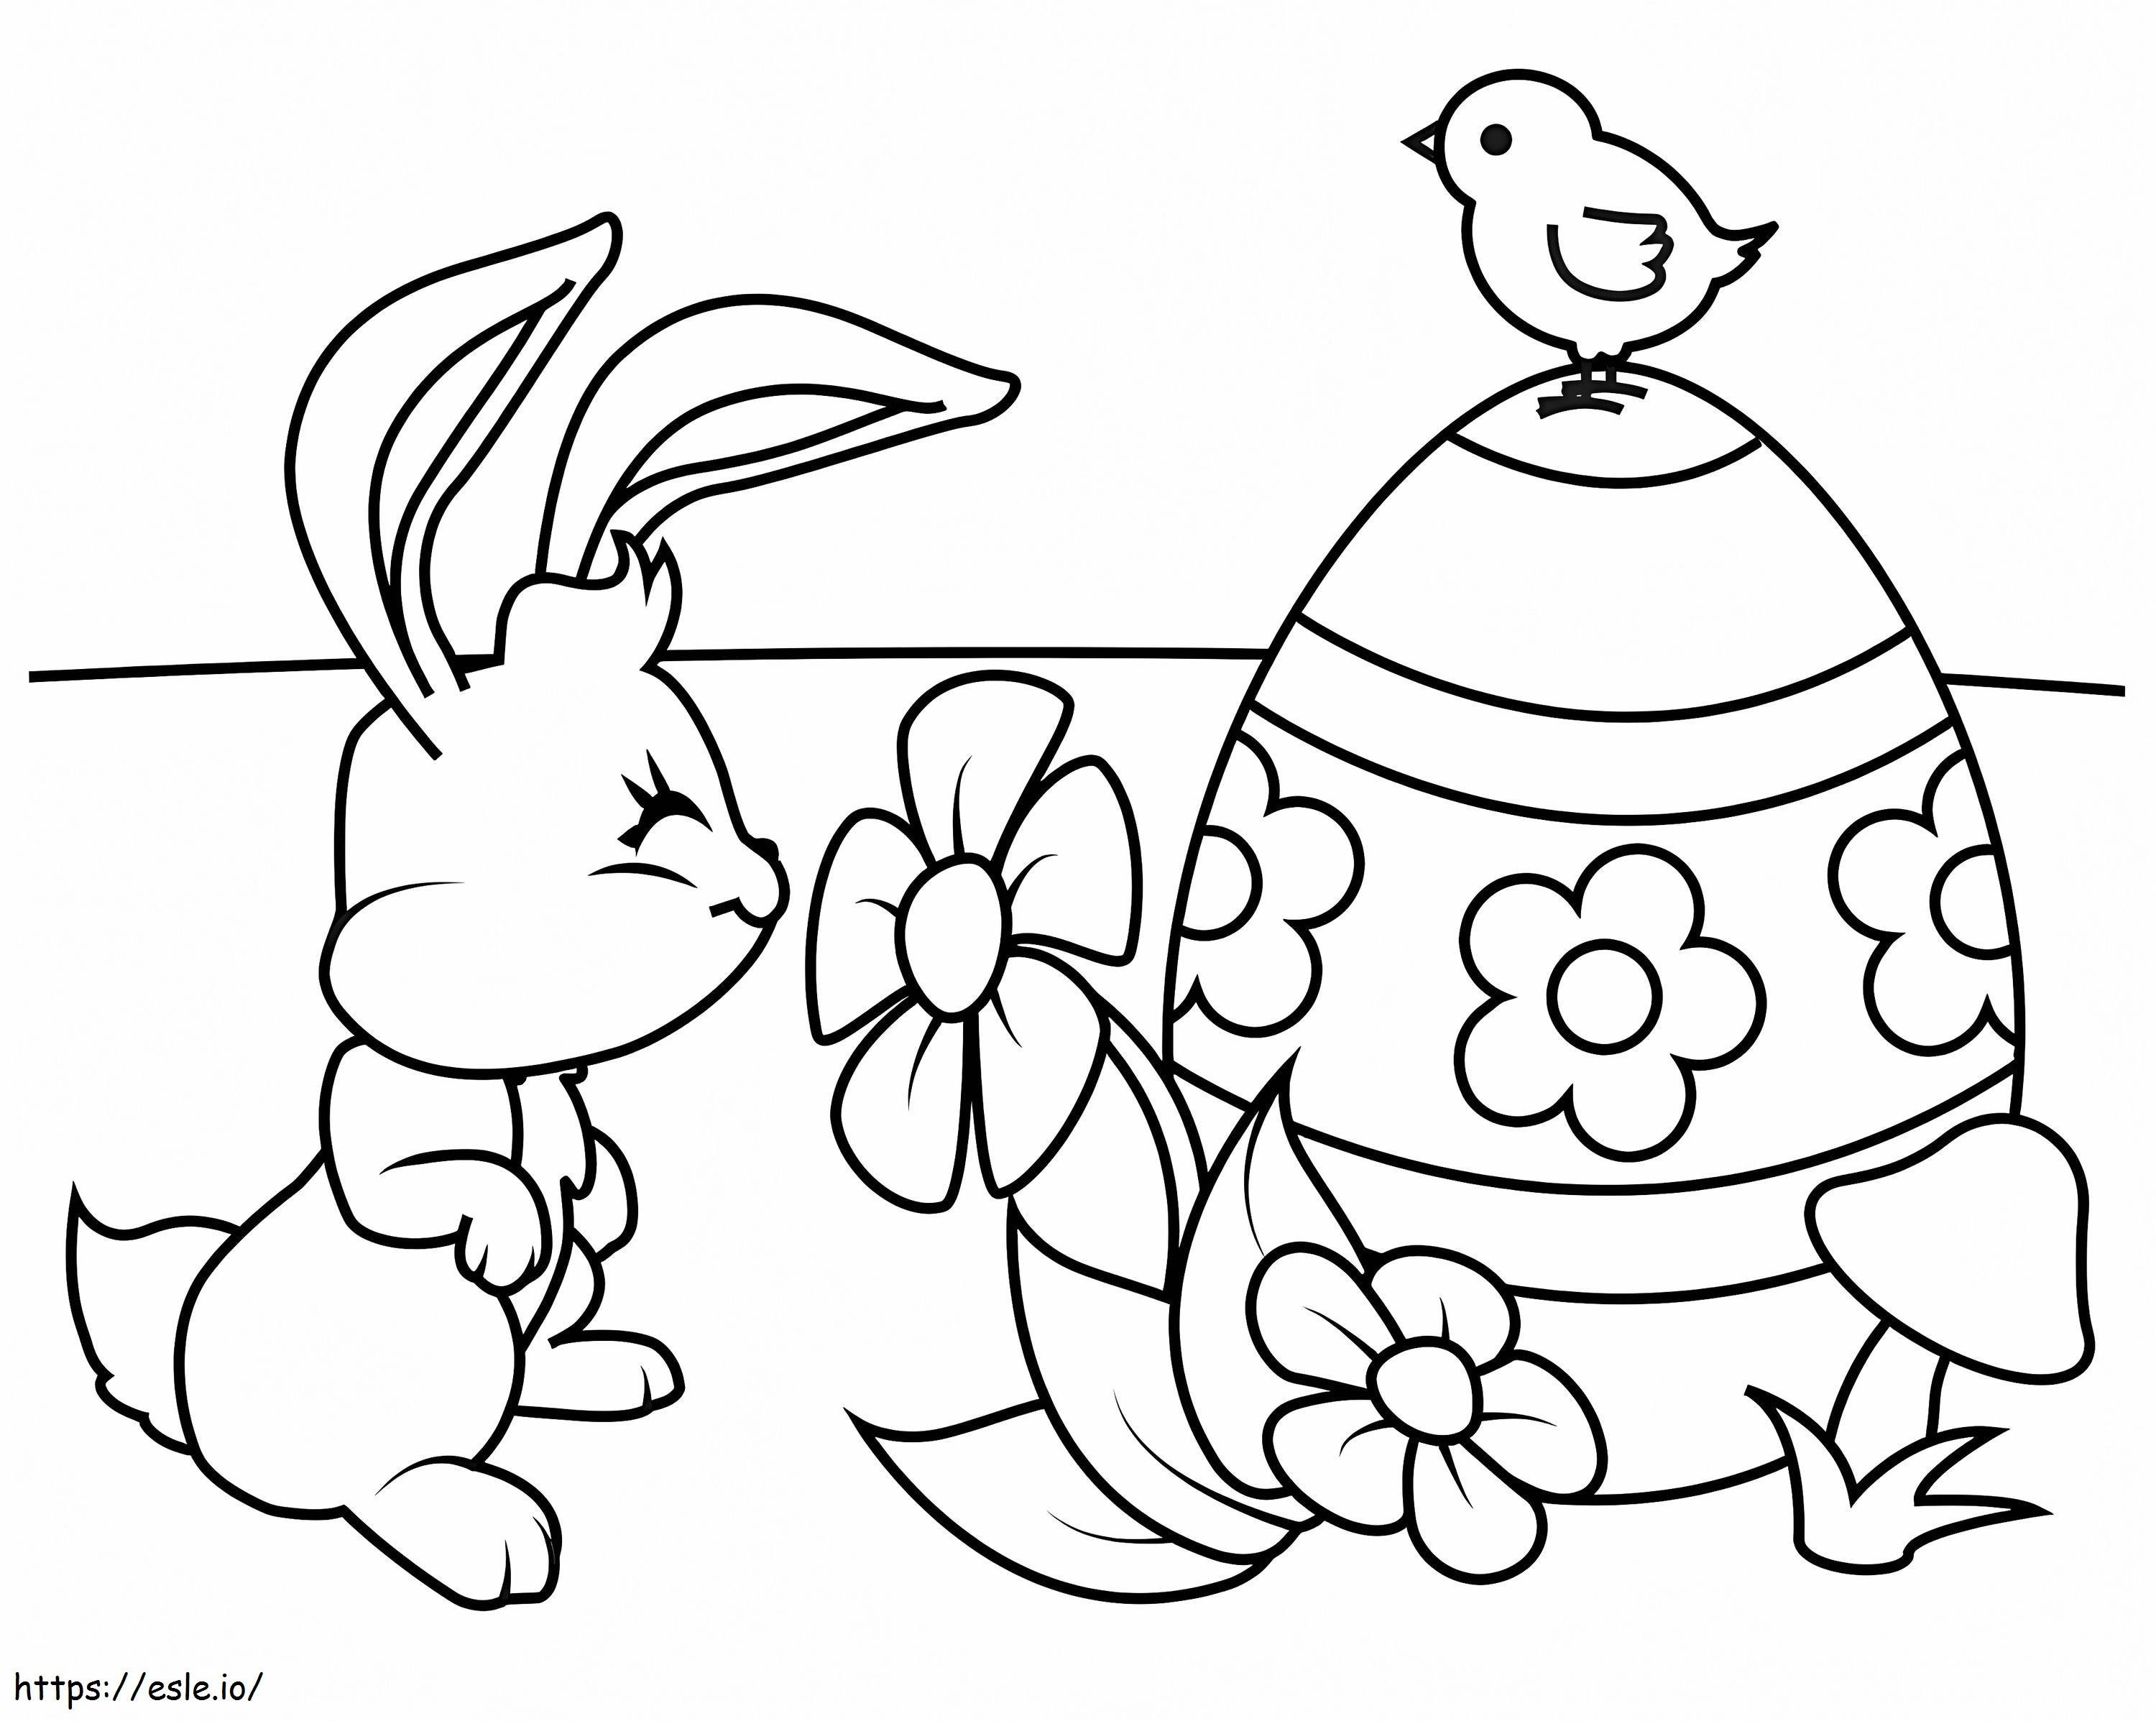 Easter Rabbit With Flowers coloring page